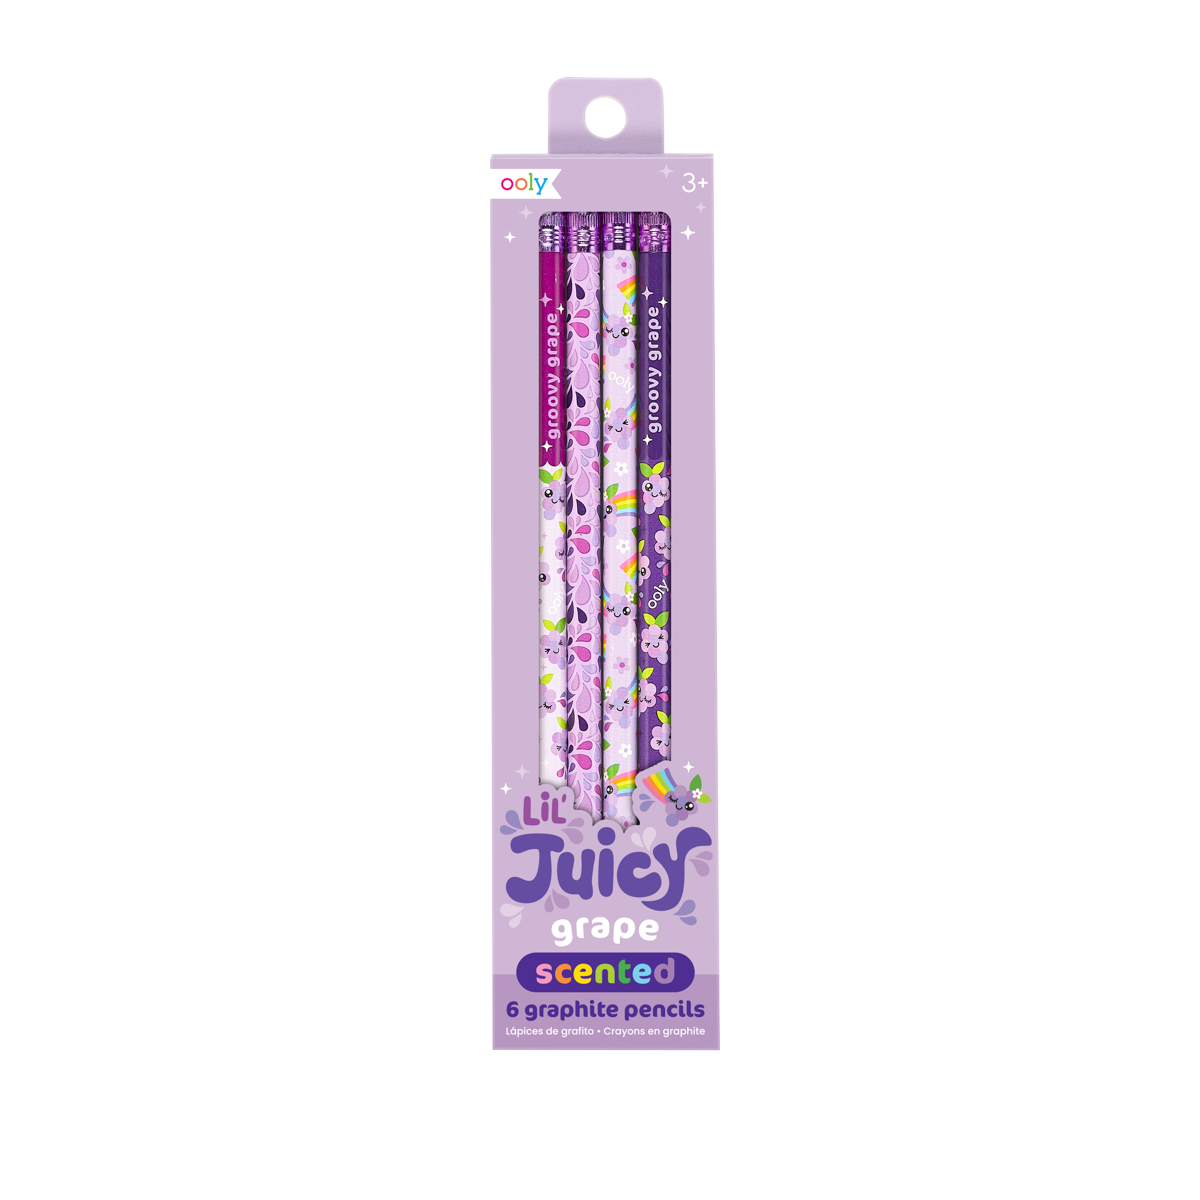 OOLY Lil Juicy Scented Graphite Pencils  Grape in packaging